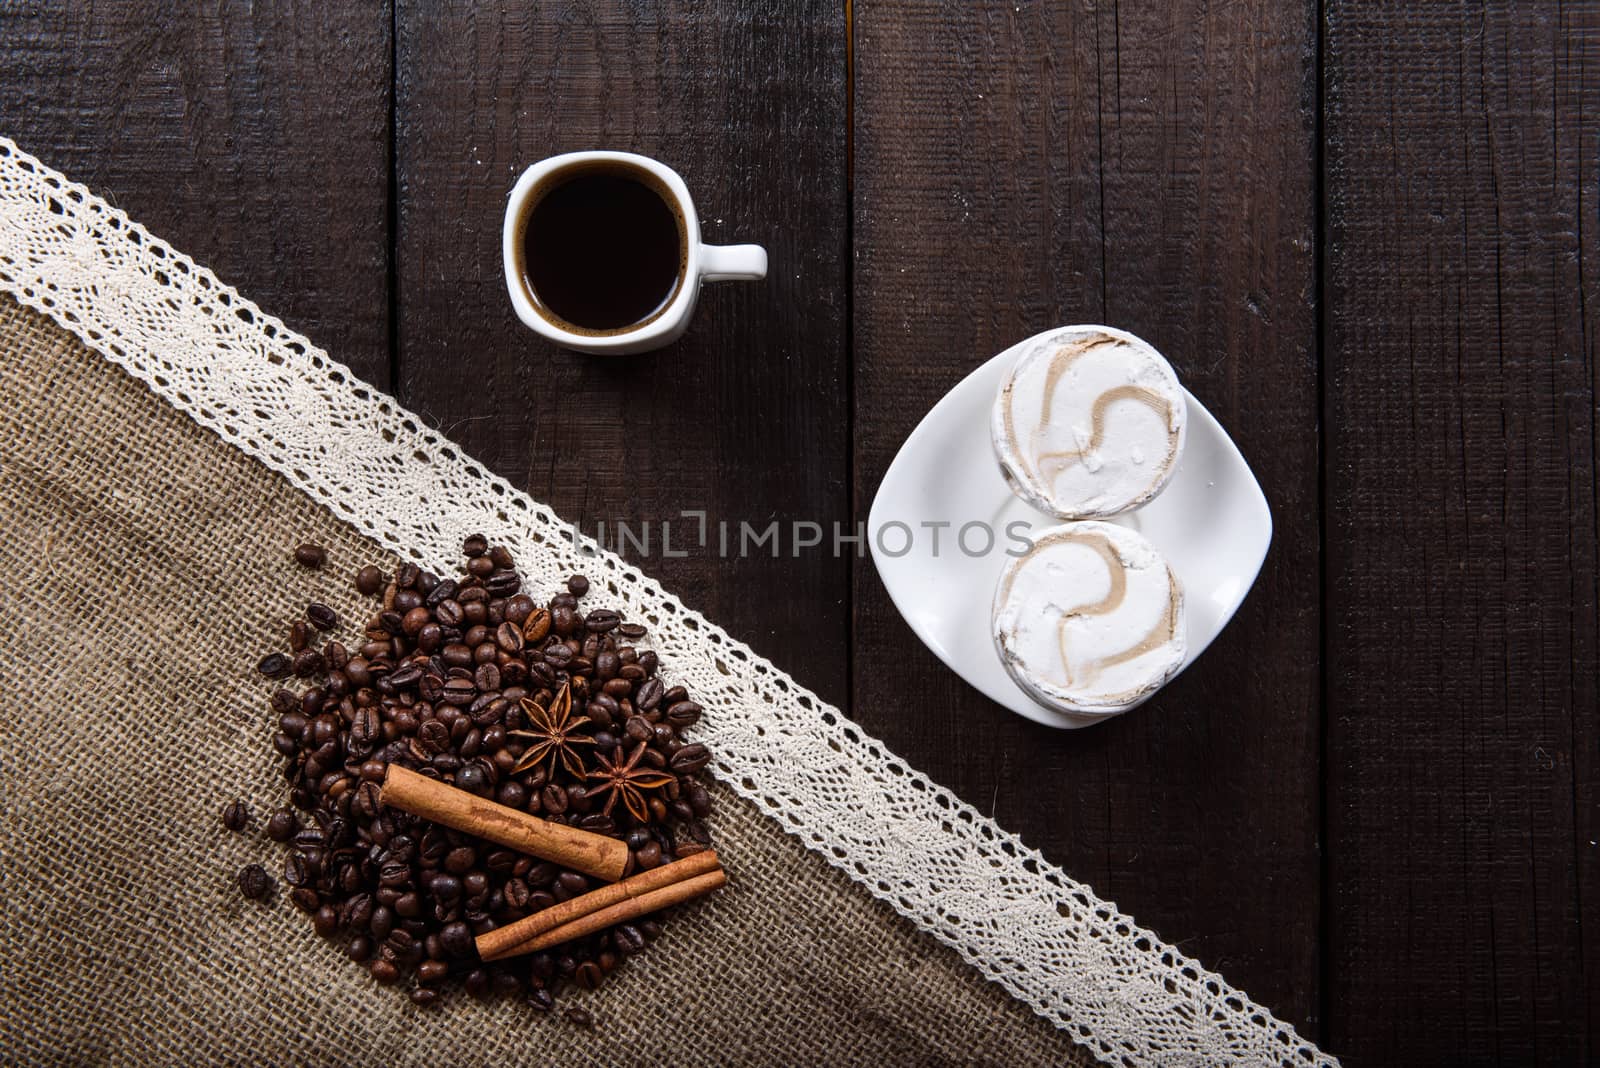 black coffee with cinnamon and star anise next Cup and marshmallows